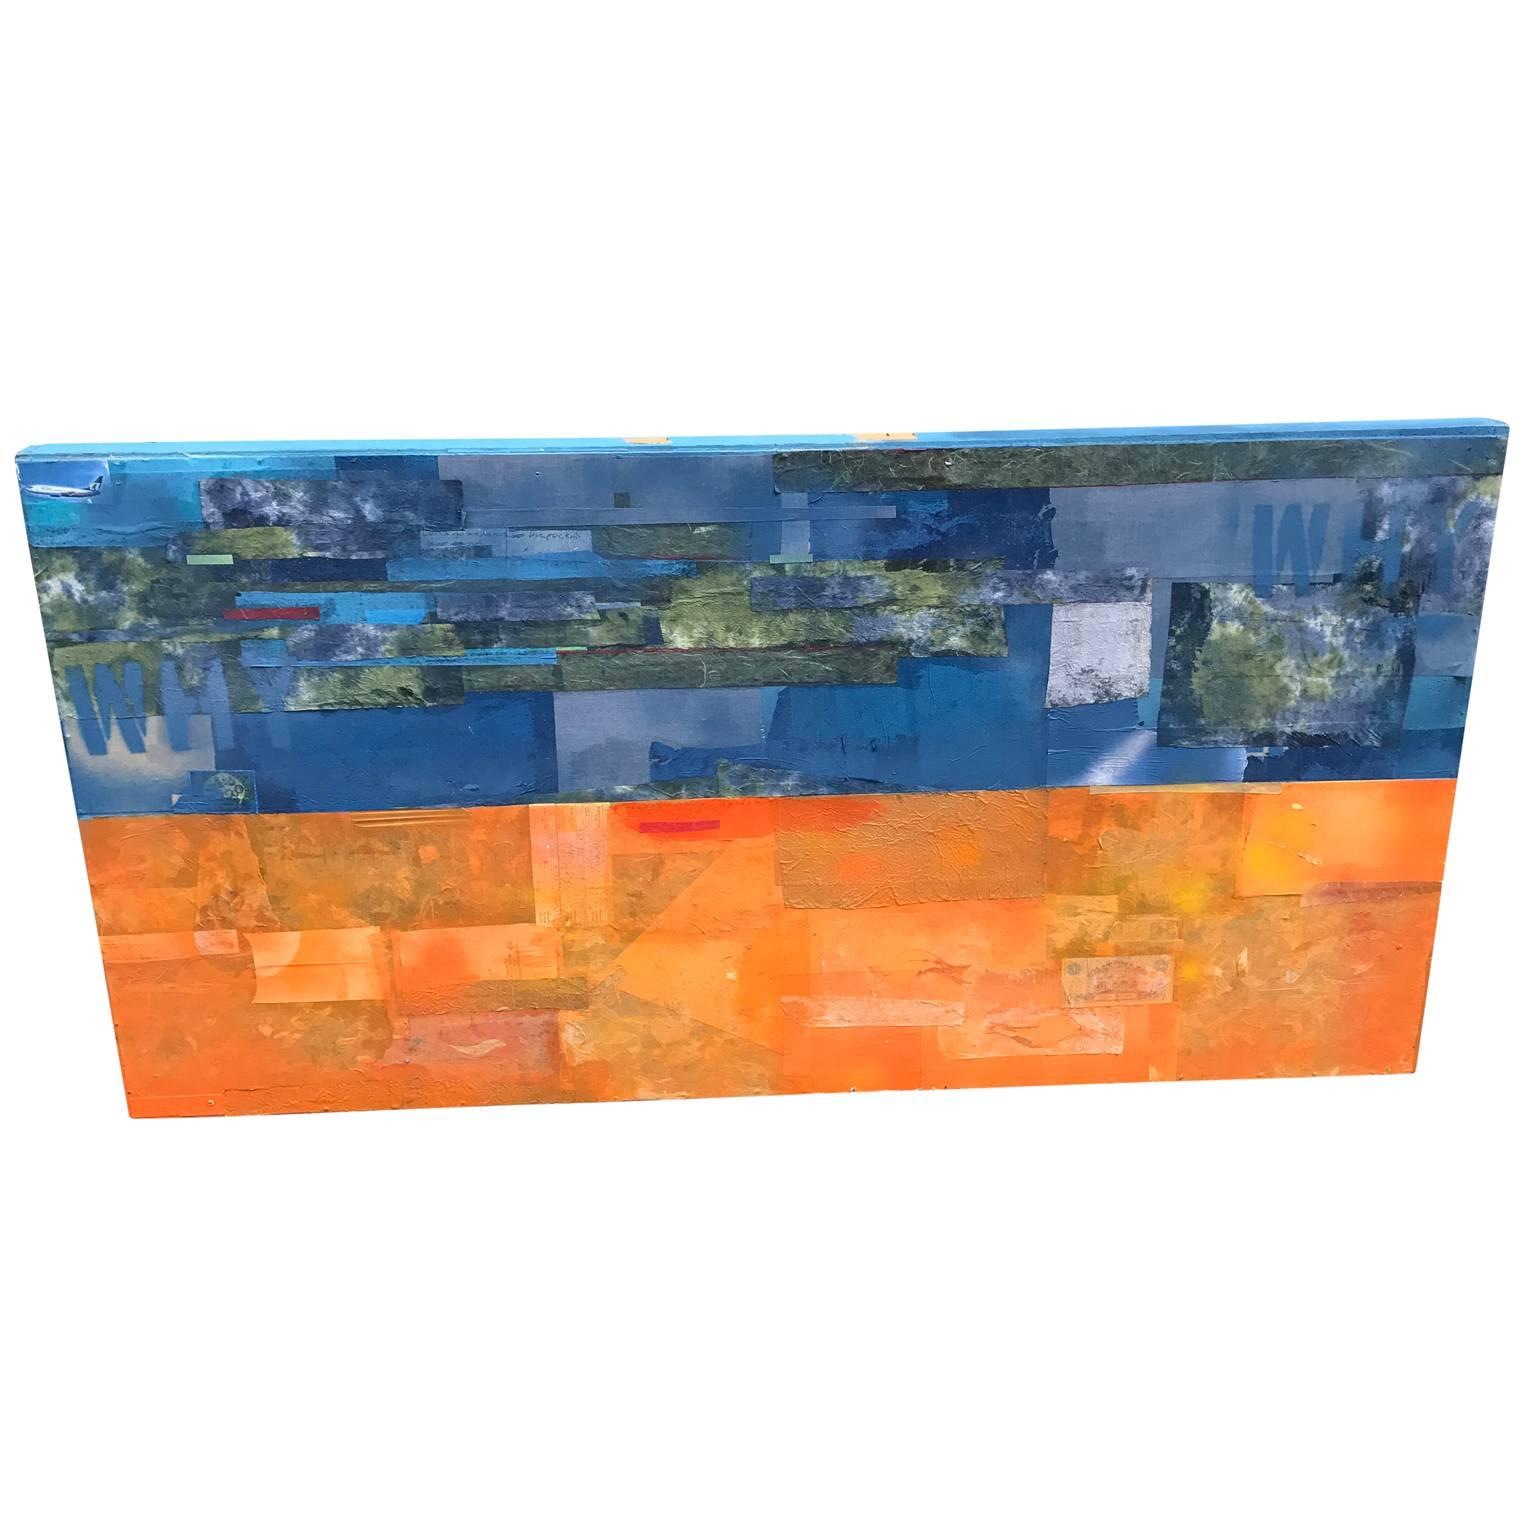 Modern multimedia wall art of a dichotomy of blue and orange collages.